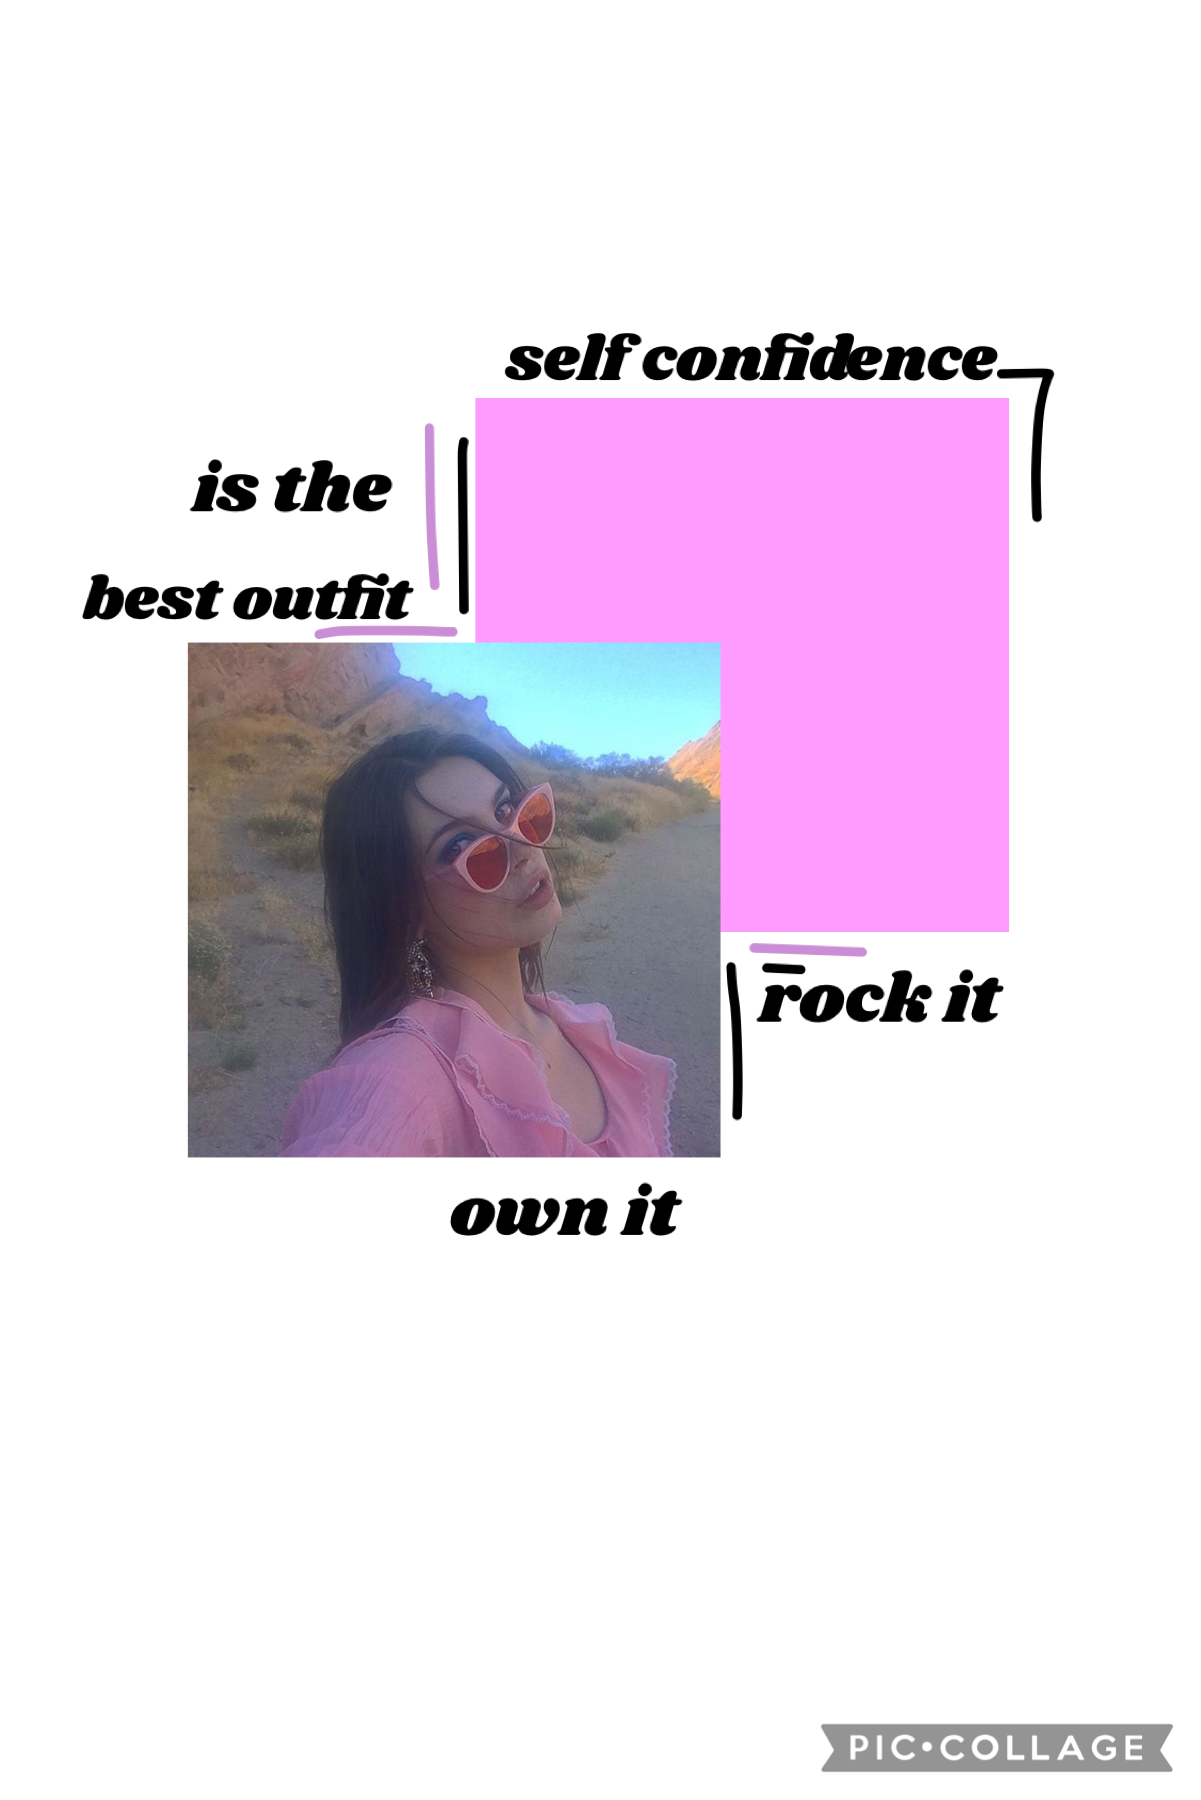 have confidence! I believe in you <3